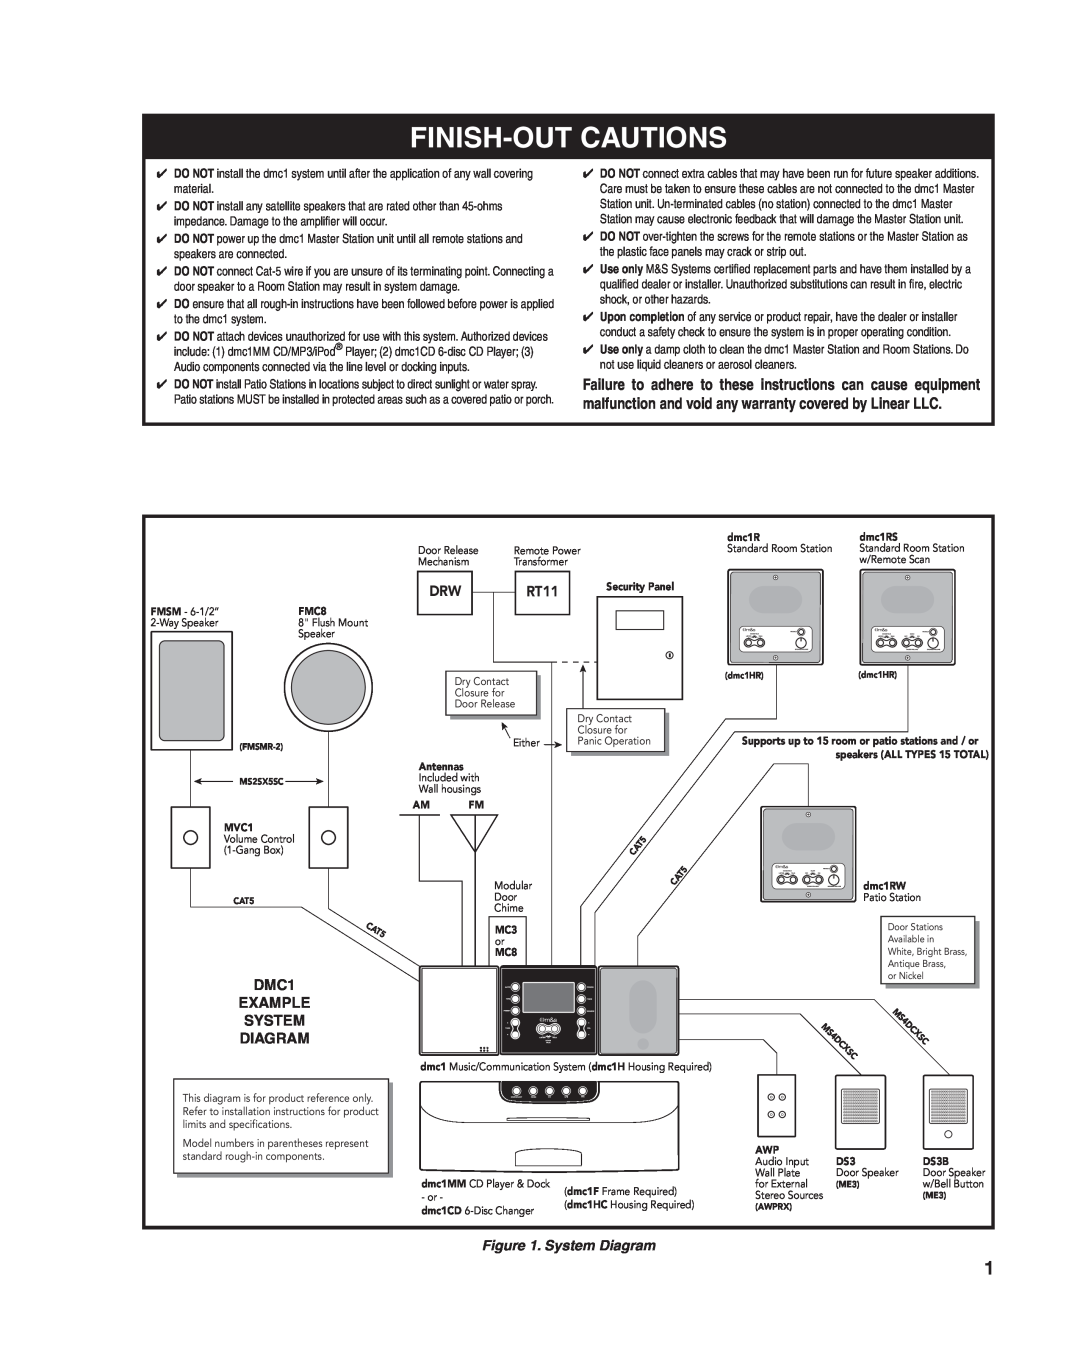 M&S Systems DMC1HC important safety instructions Finish-Outcautions, Example System Diagram, RT11, MS4DCXSC 